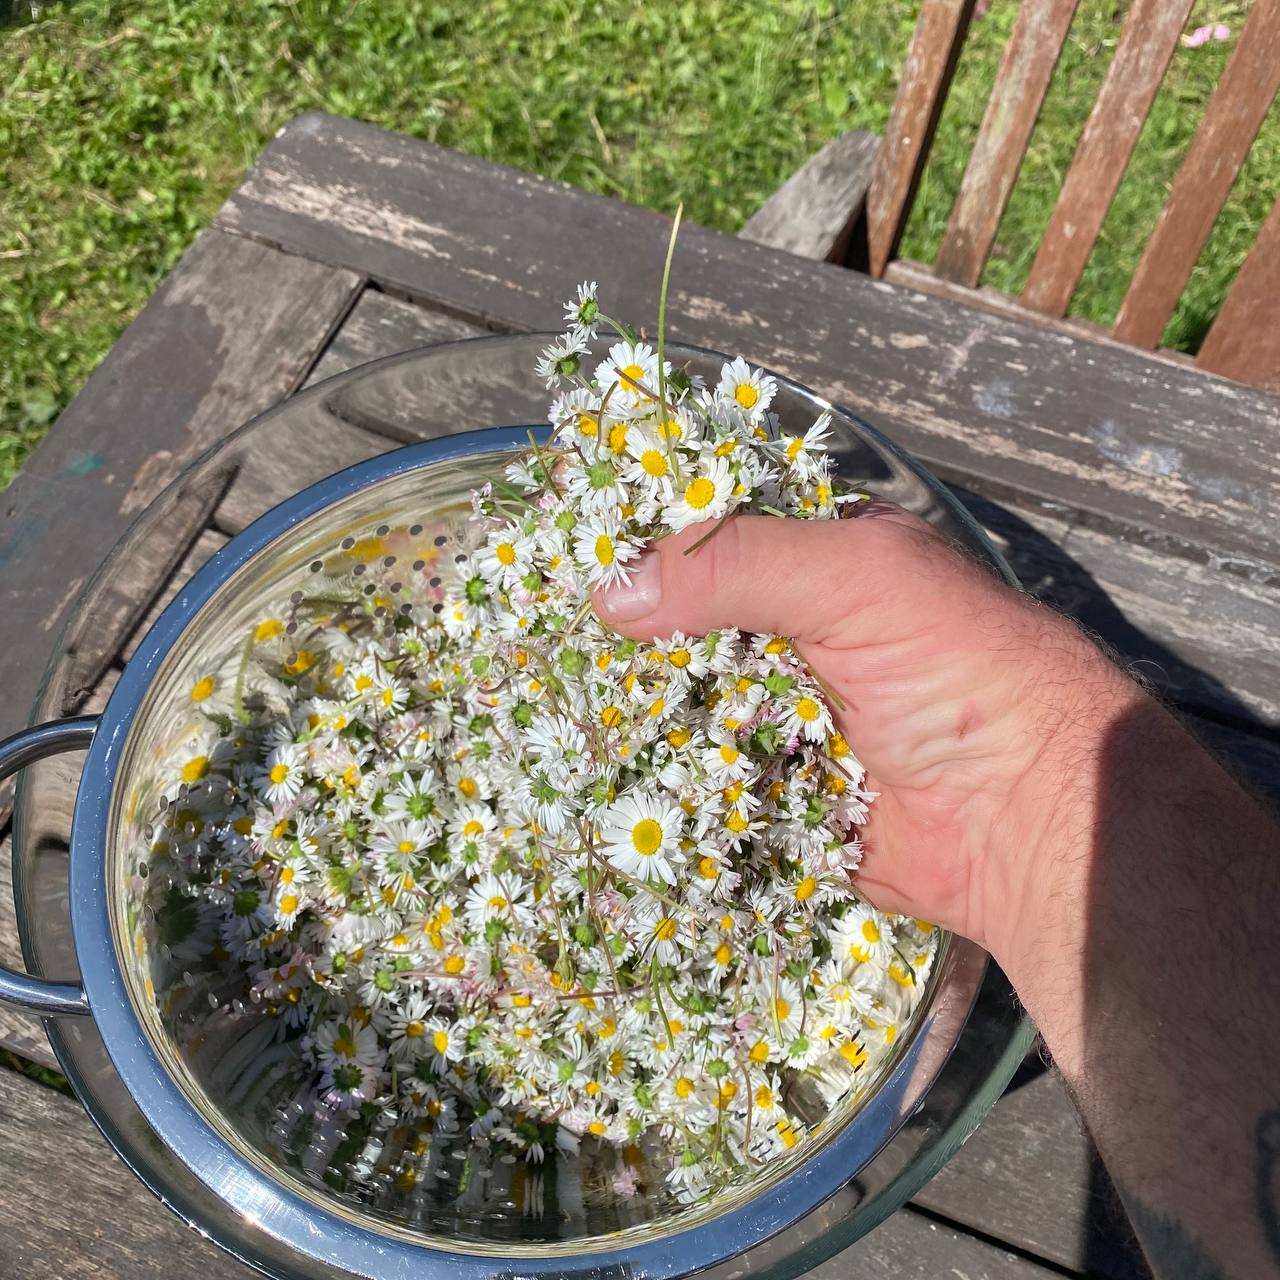 Draining the water from the daisies